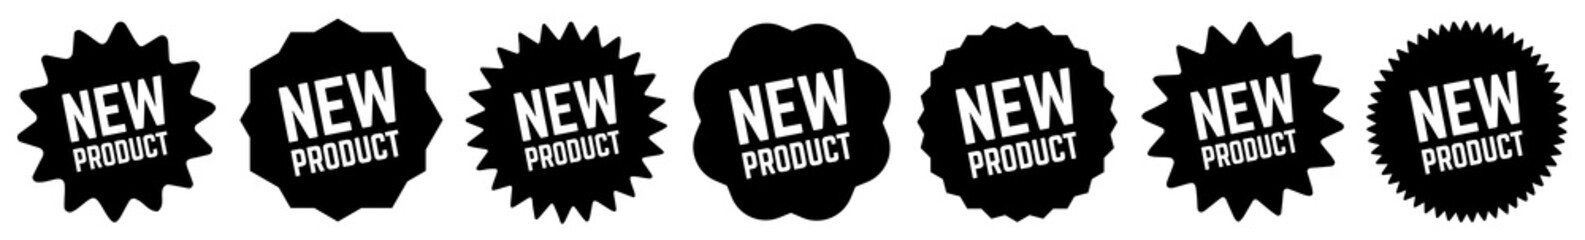 New Product Tag Black | Icon | Sticker | Deal Label | Variations